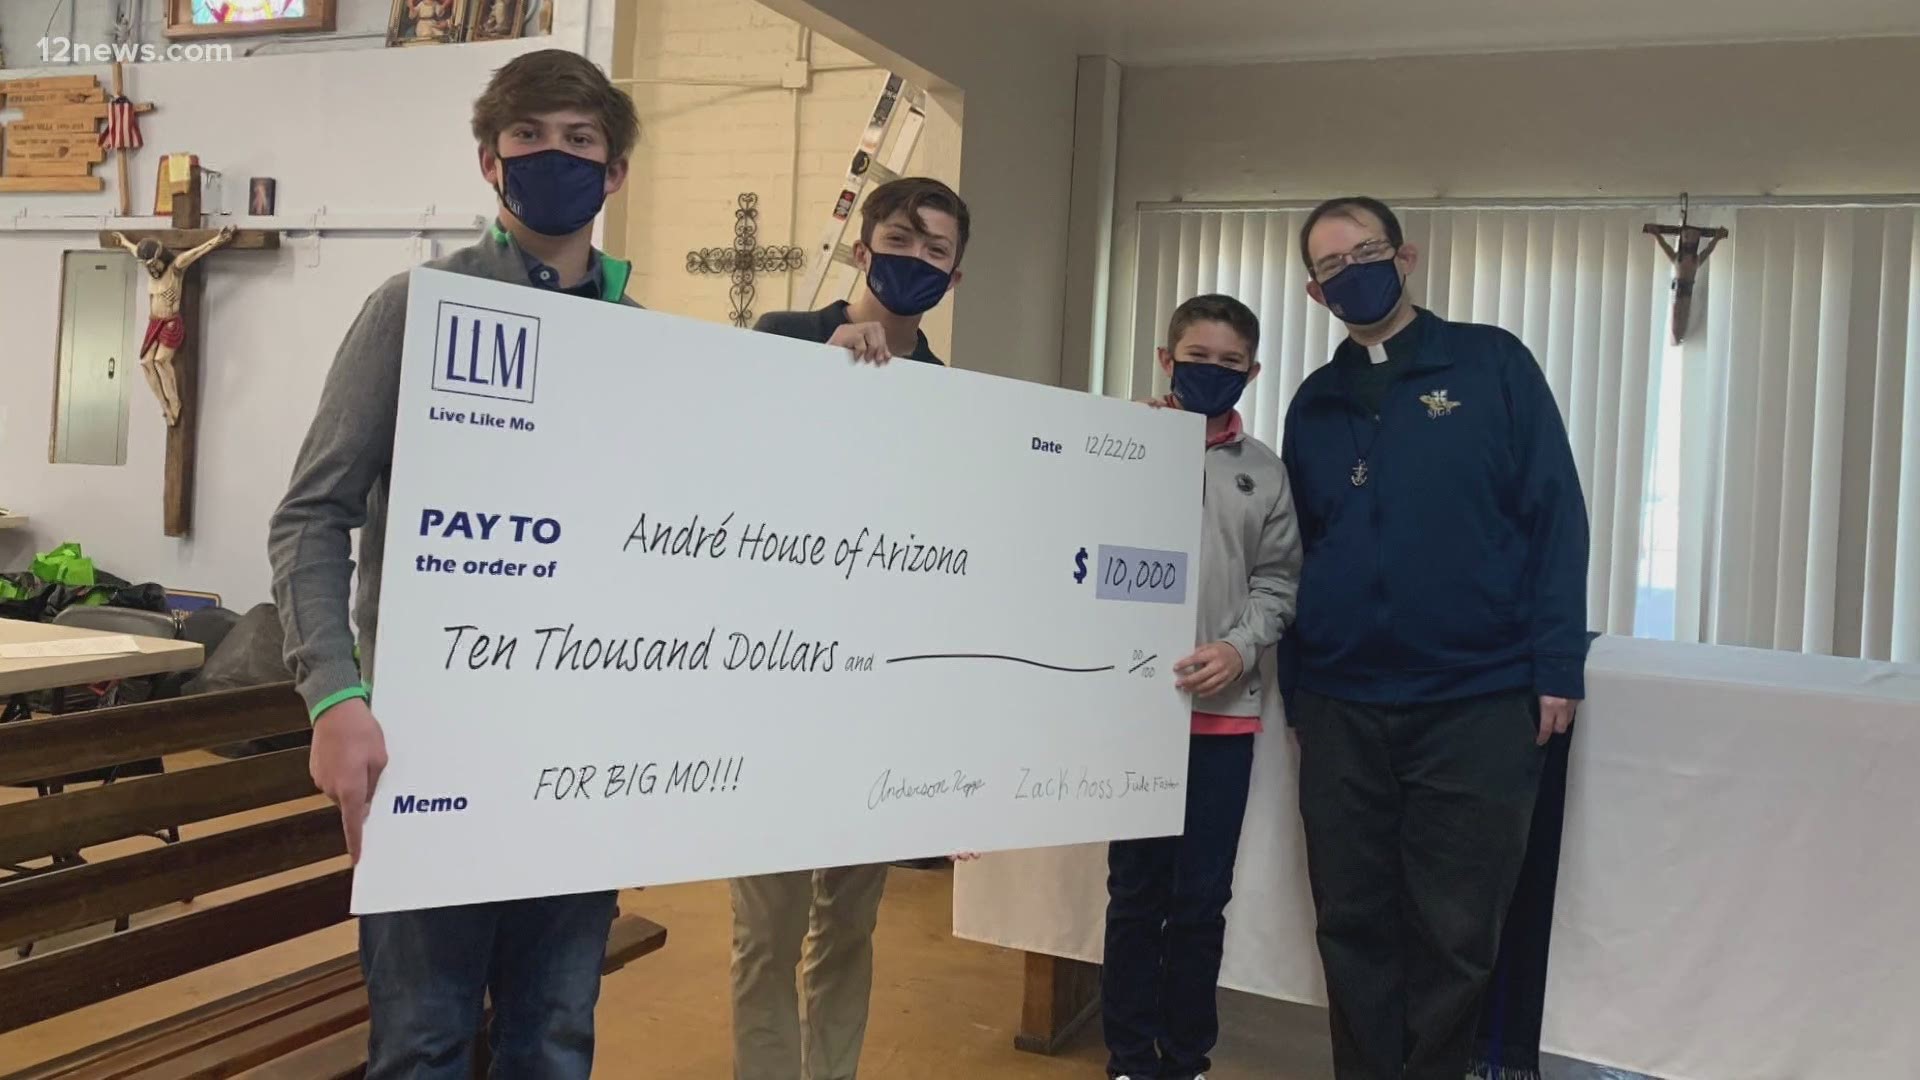 Three Valley eighth-graders sold masks with their school logo on them, raising $10,000. They donated the money to the Andre House Homeless Shelter in Phoenix.